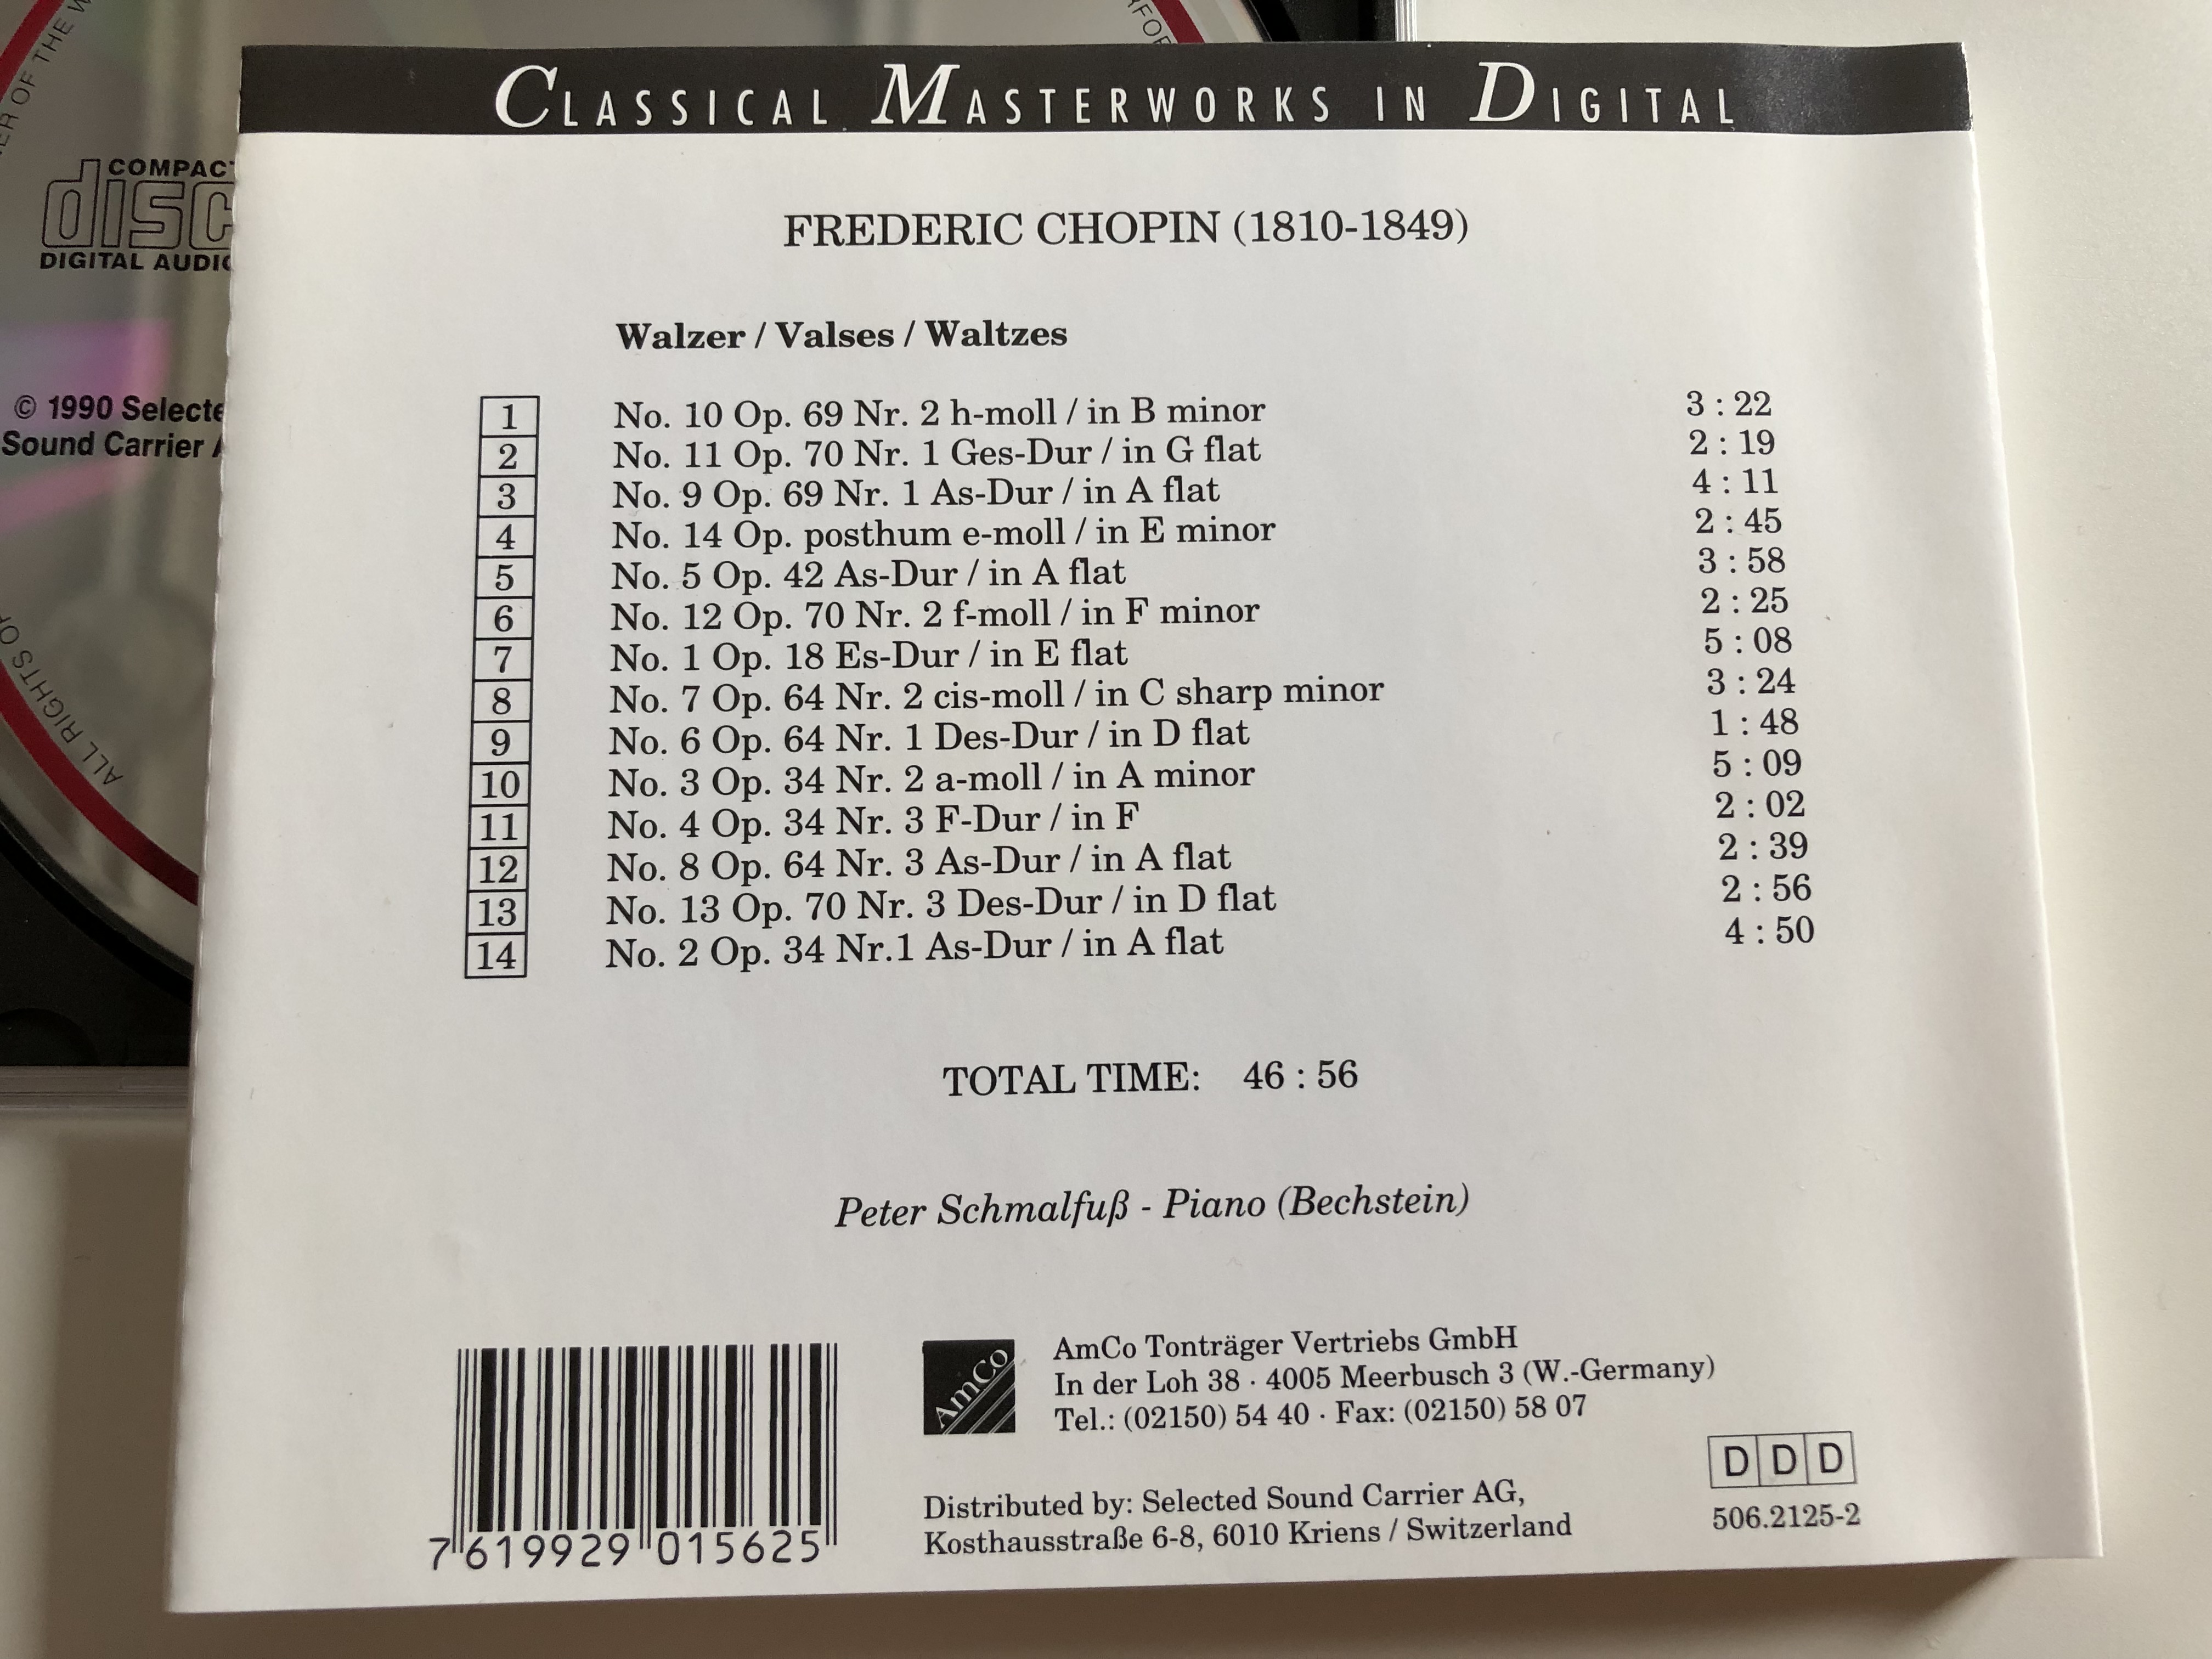 fr-d-ric-chopin-walzer-valses-waltzes-peter-schmalfuss-piano-classical-masterworks-in-digital-selected-sound-carrier-audio-cd-1990-506-3-.jpg